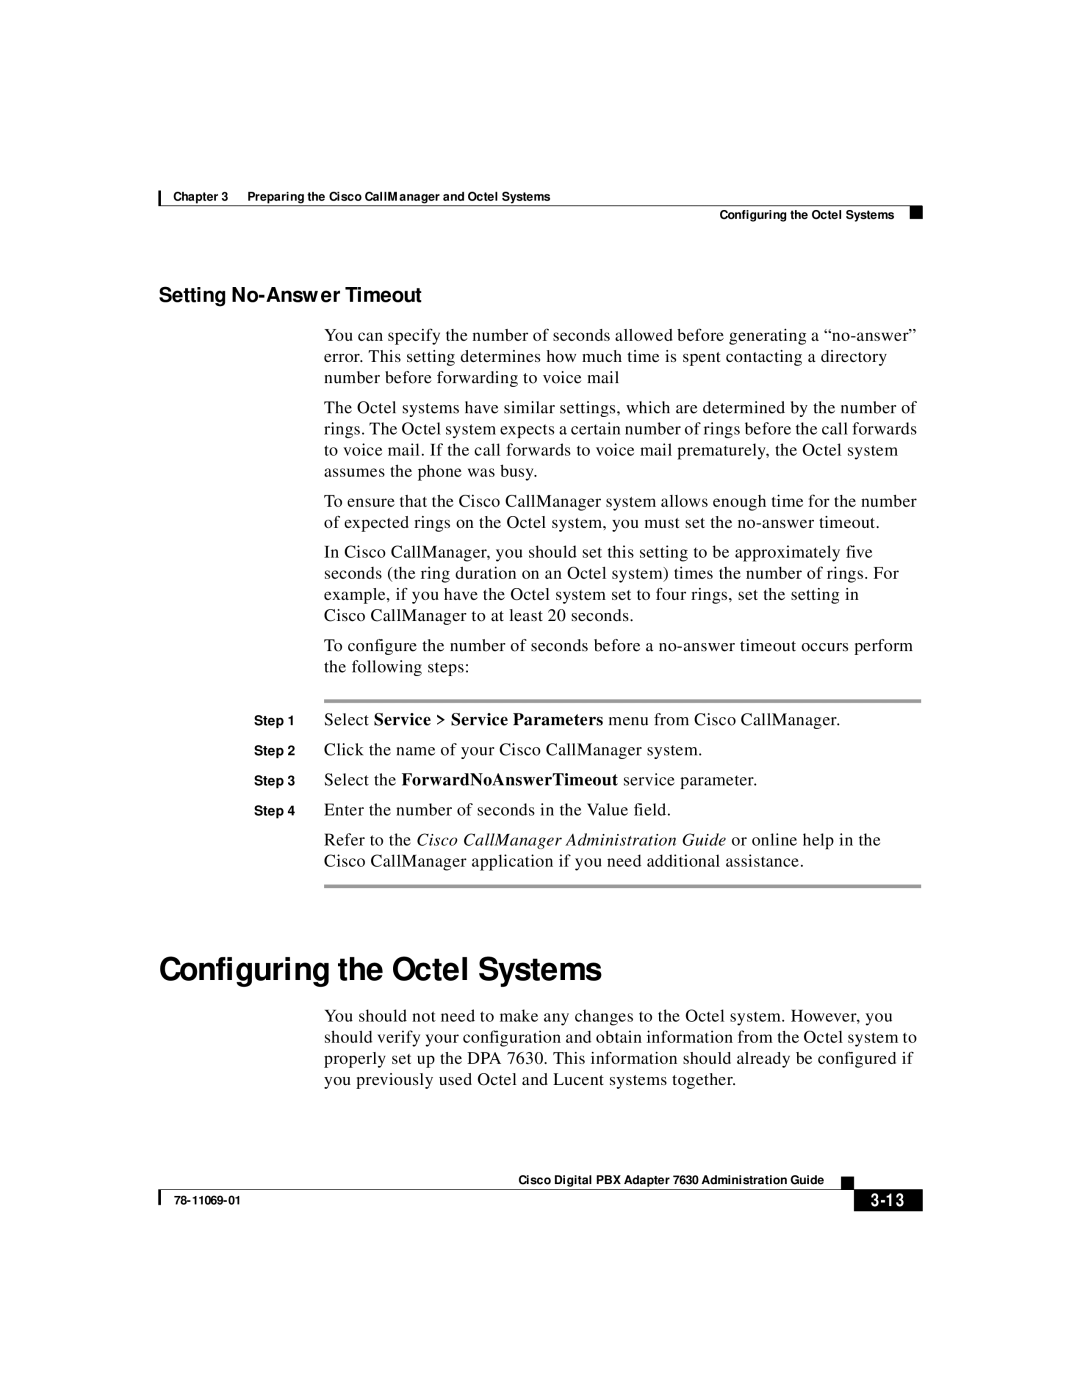 3Com 78-11069-01 manual Configuring the Octel Systems, Setting No-Answer Timeout, 3-13 